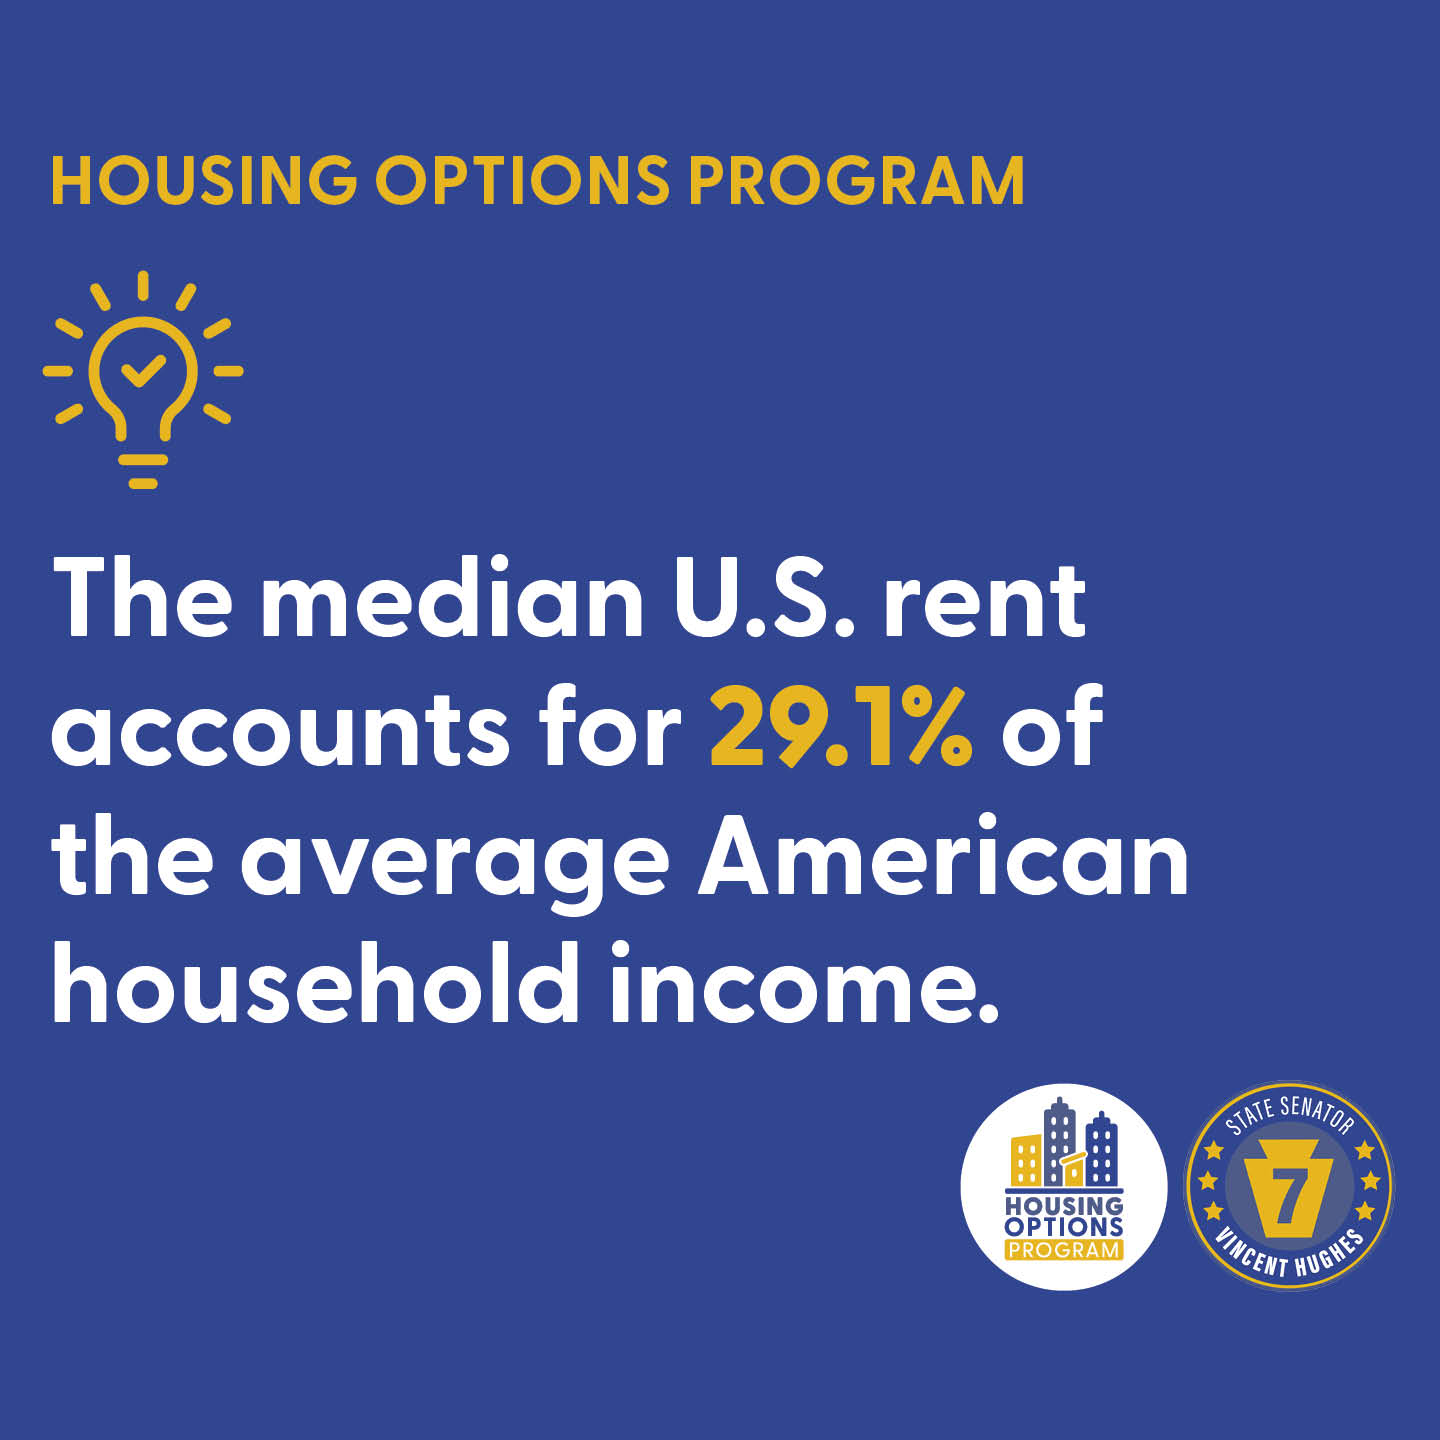 HOUSING OPTIONS PROGRAM - The median U.S. rent accounts for 29.1% of the average American household income.